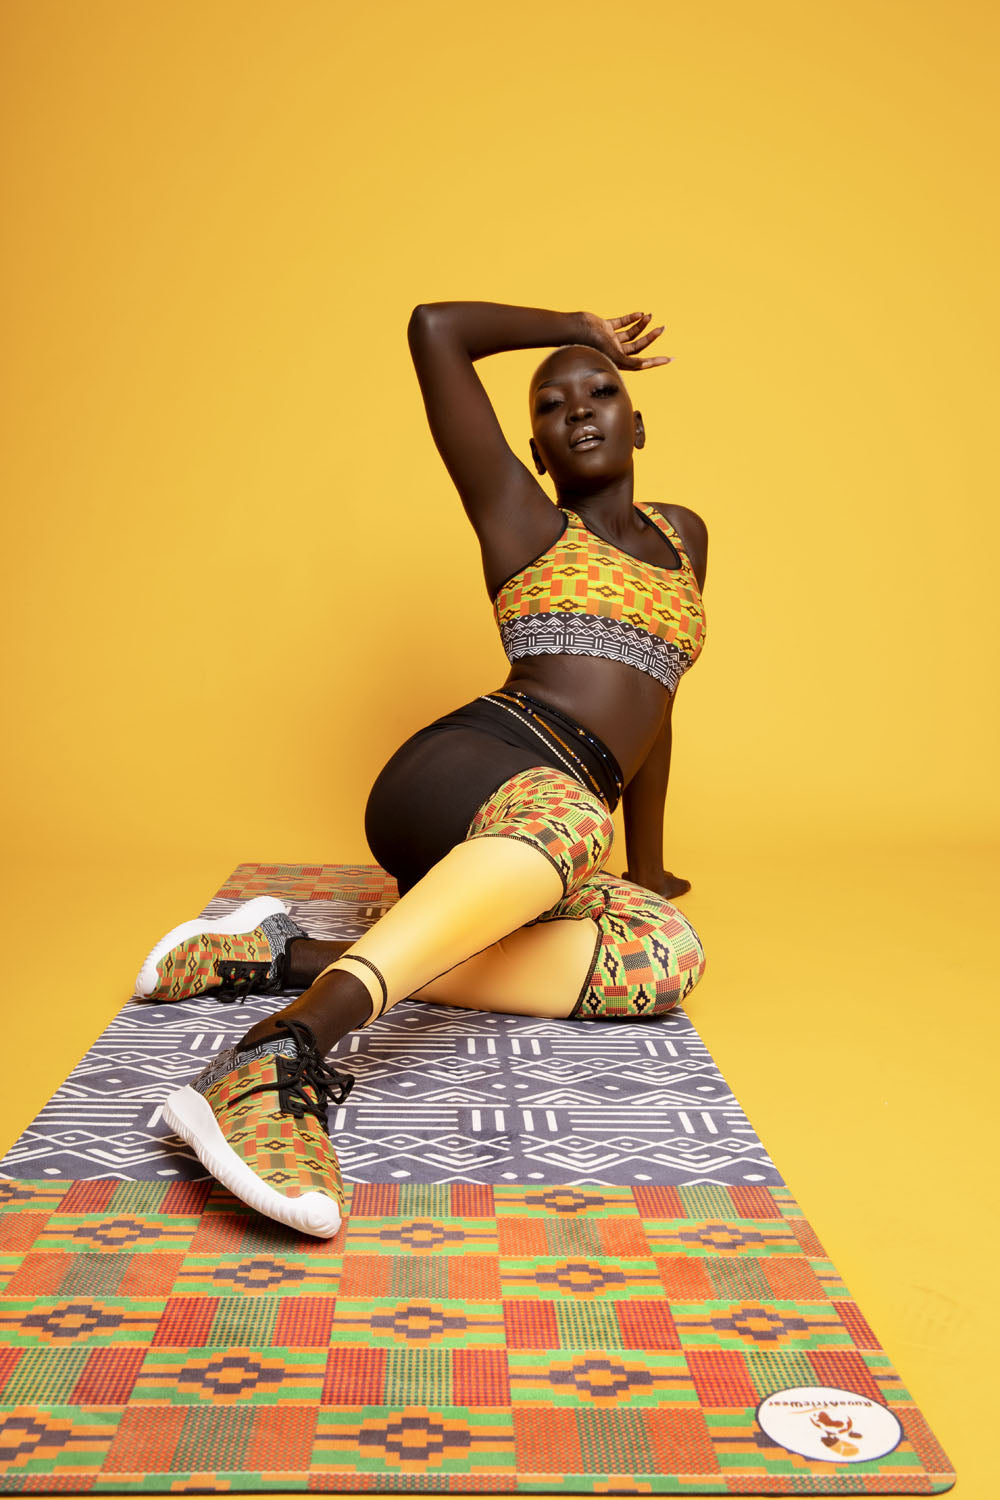 RuvaAfricWear To Open Store At Mall of America In June 2021